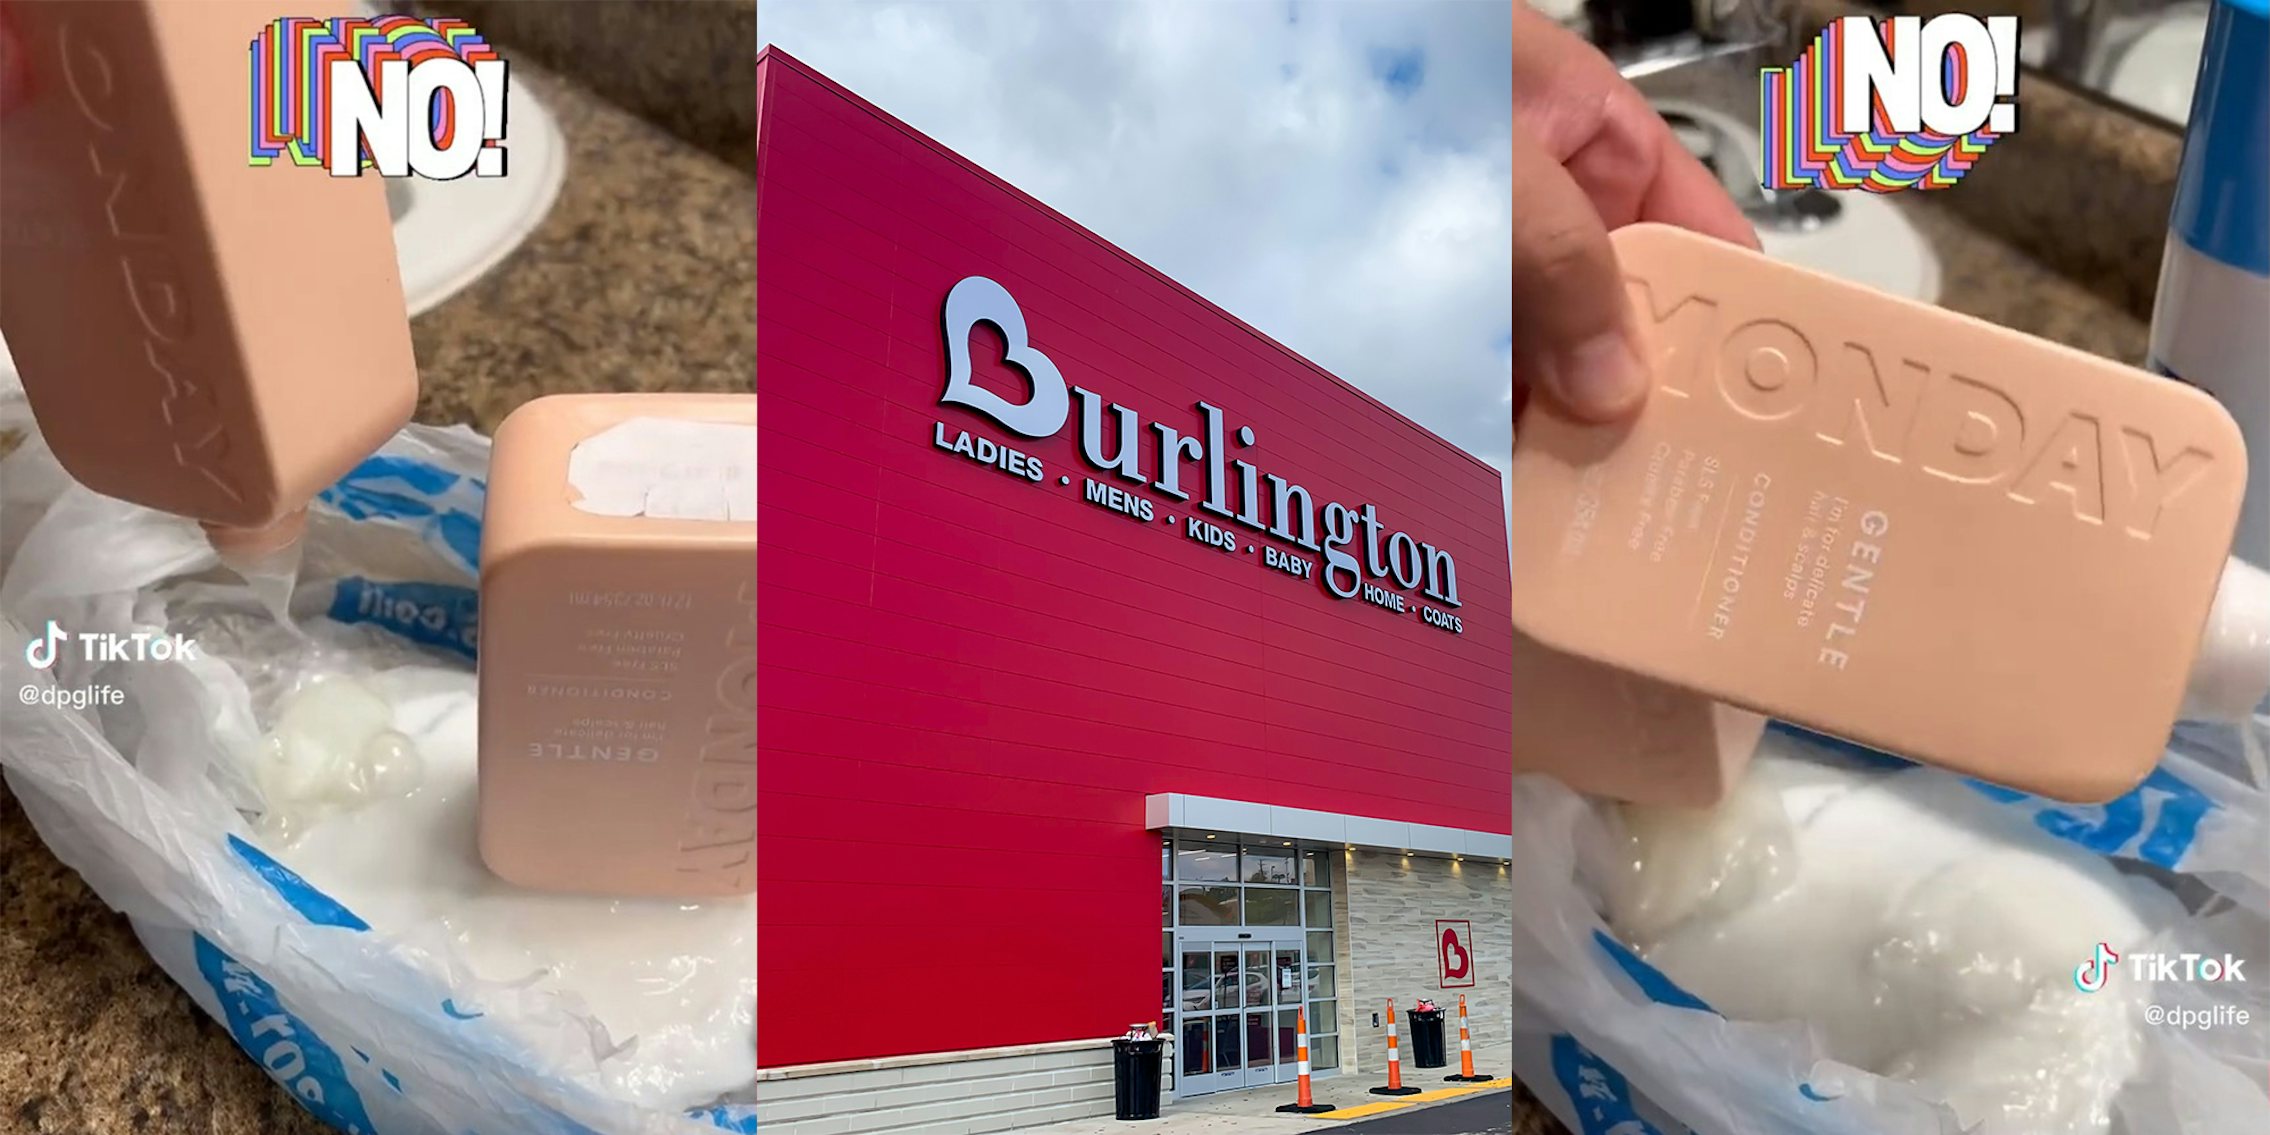 Woman says shampoo and conditioner she purchased at Burlington caused her hair to fall out